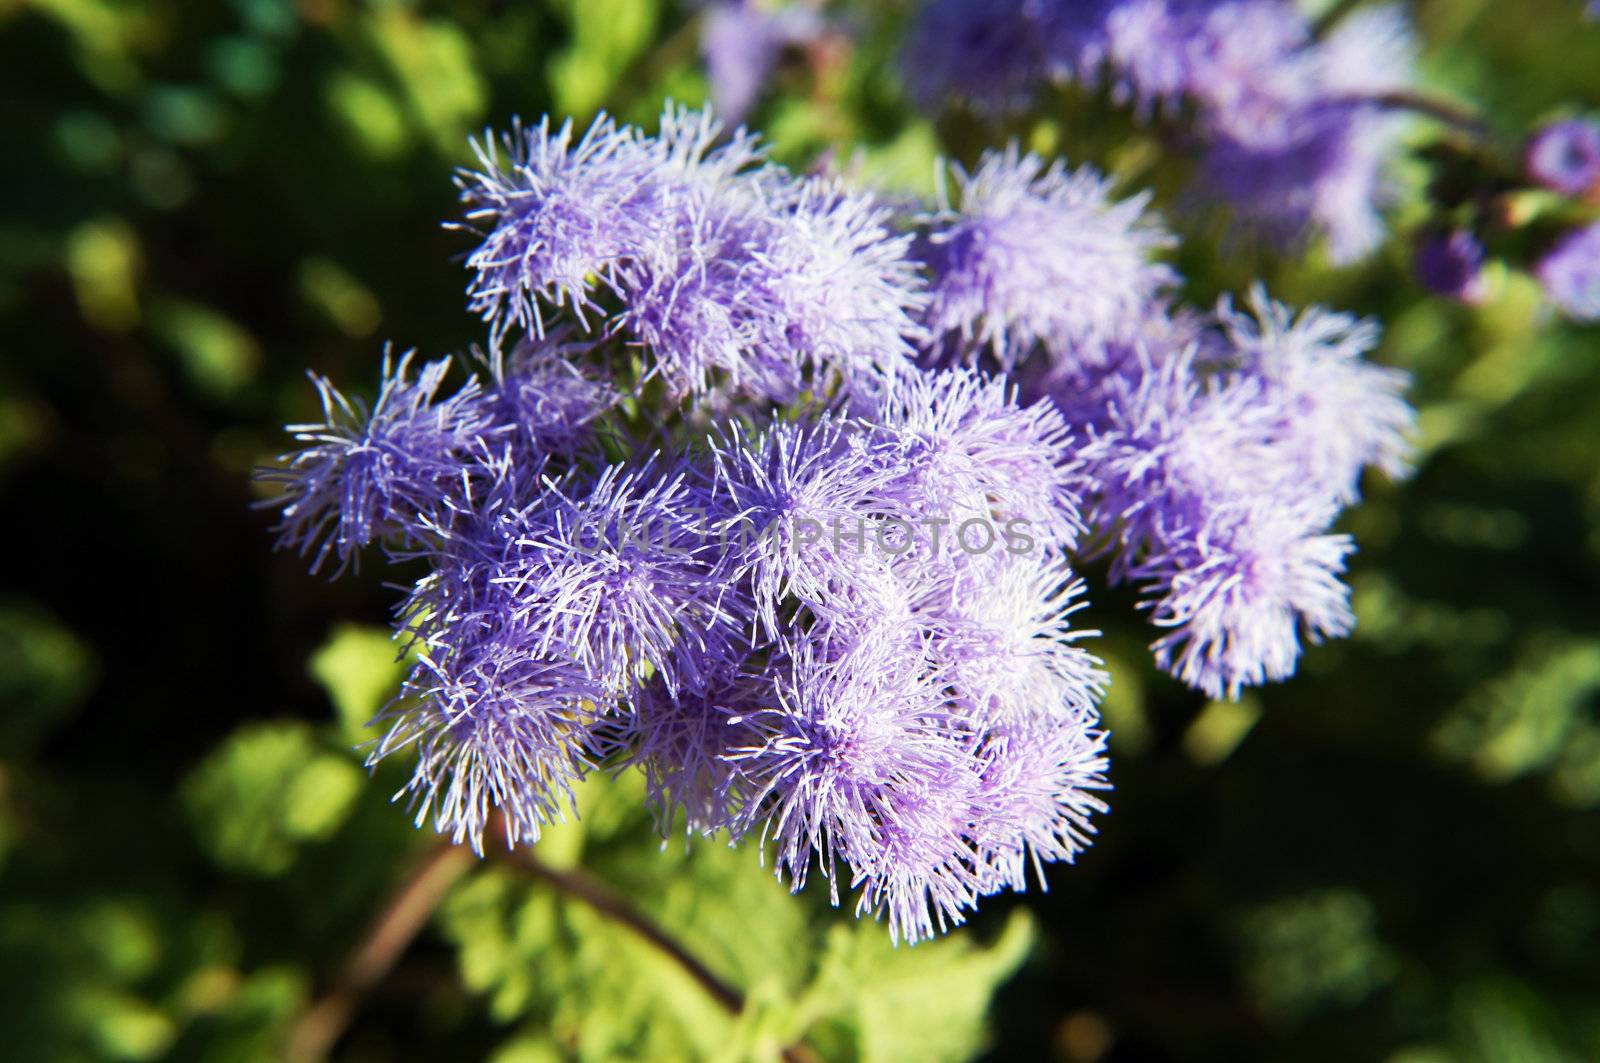 Ageratum by Elet